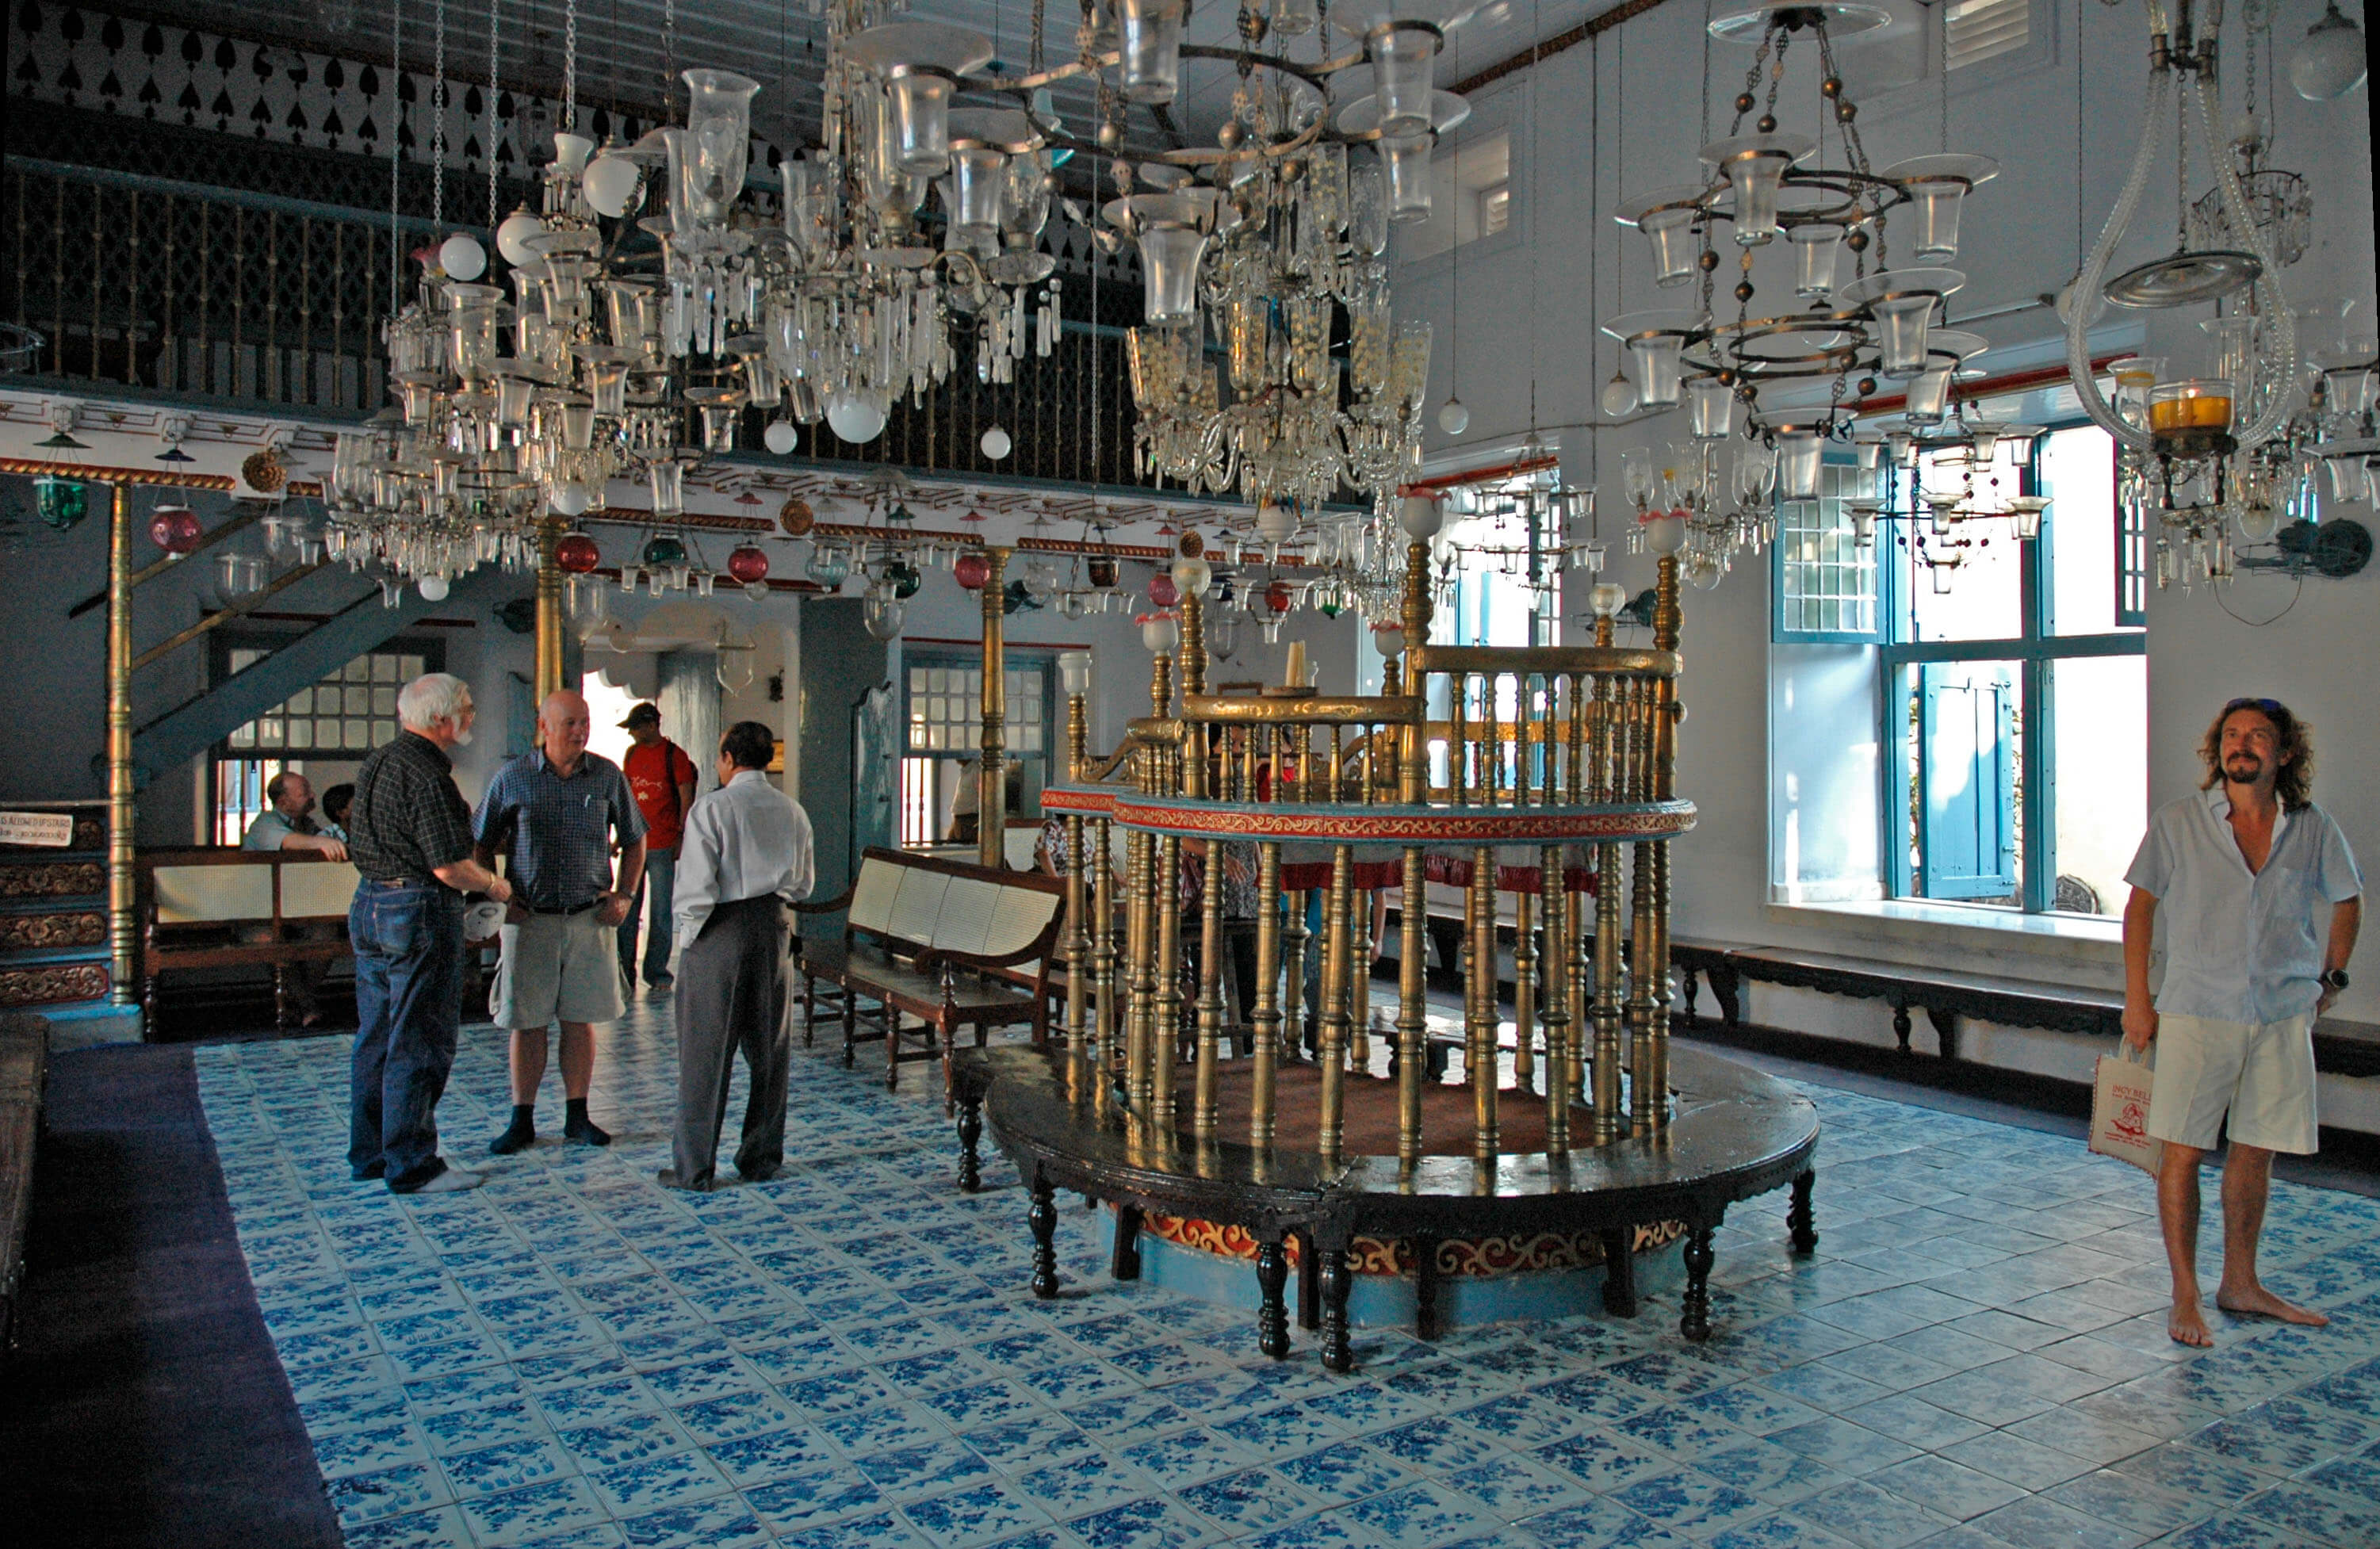 Jewish Synagogue filled with artifacts